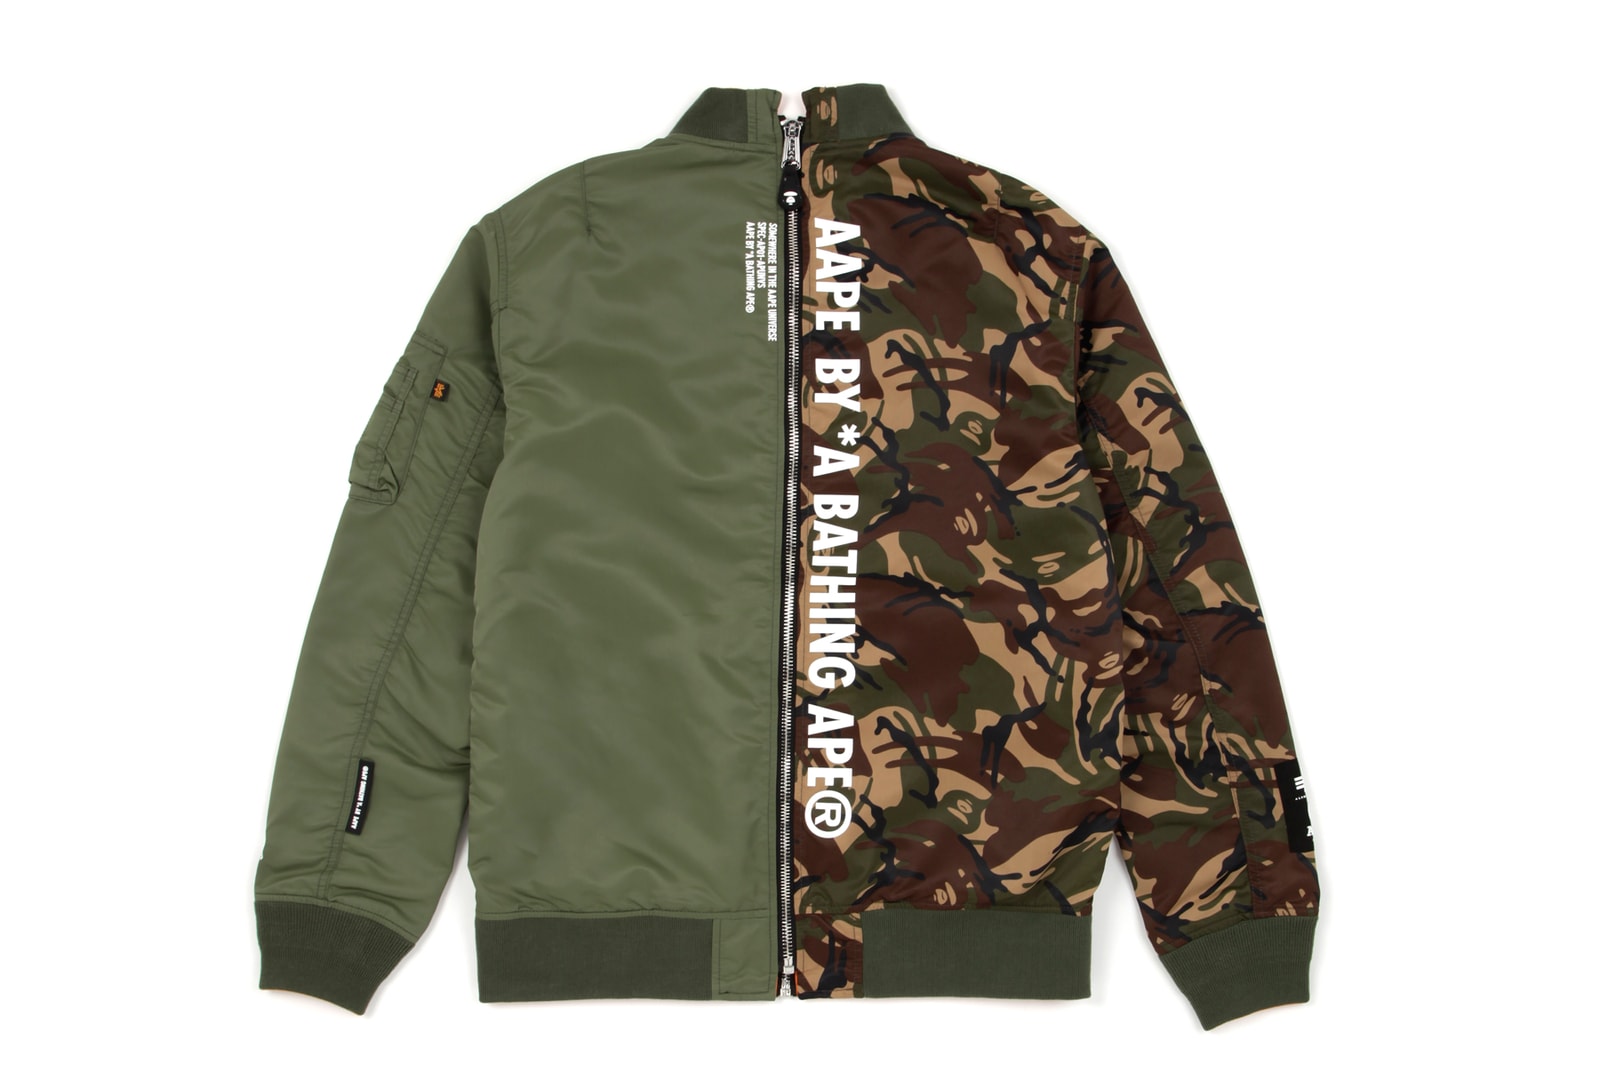 AAPE x Alpha Industries Fall/Winter 2019 Collection lookbooks outerwear jackets collaborations